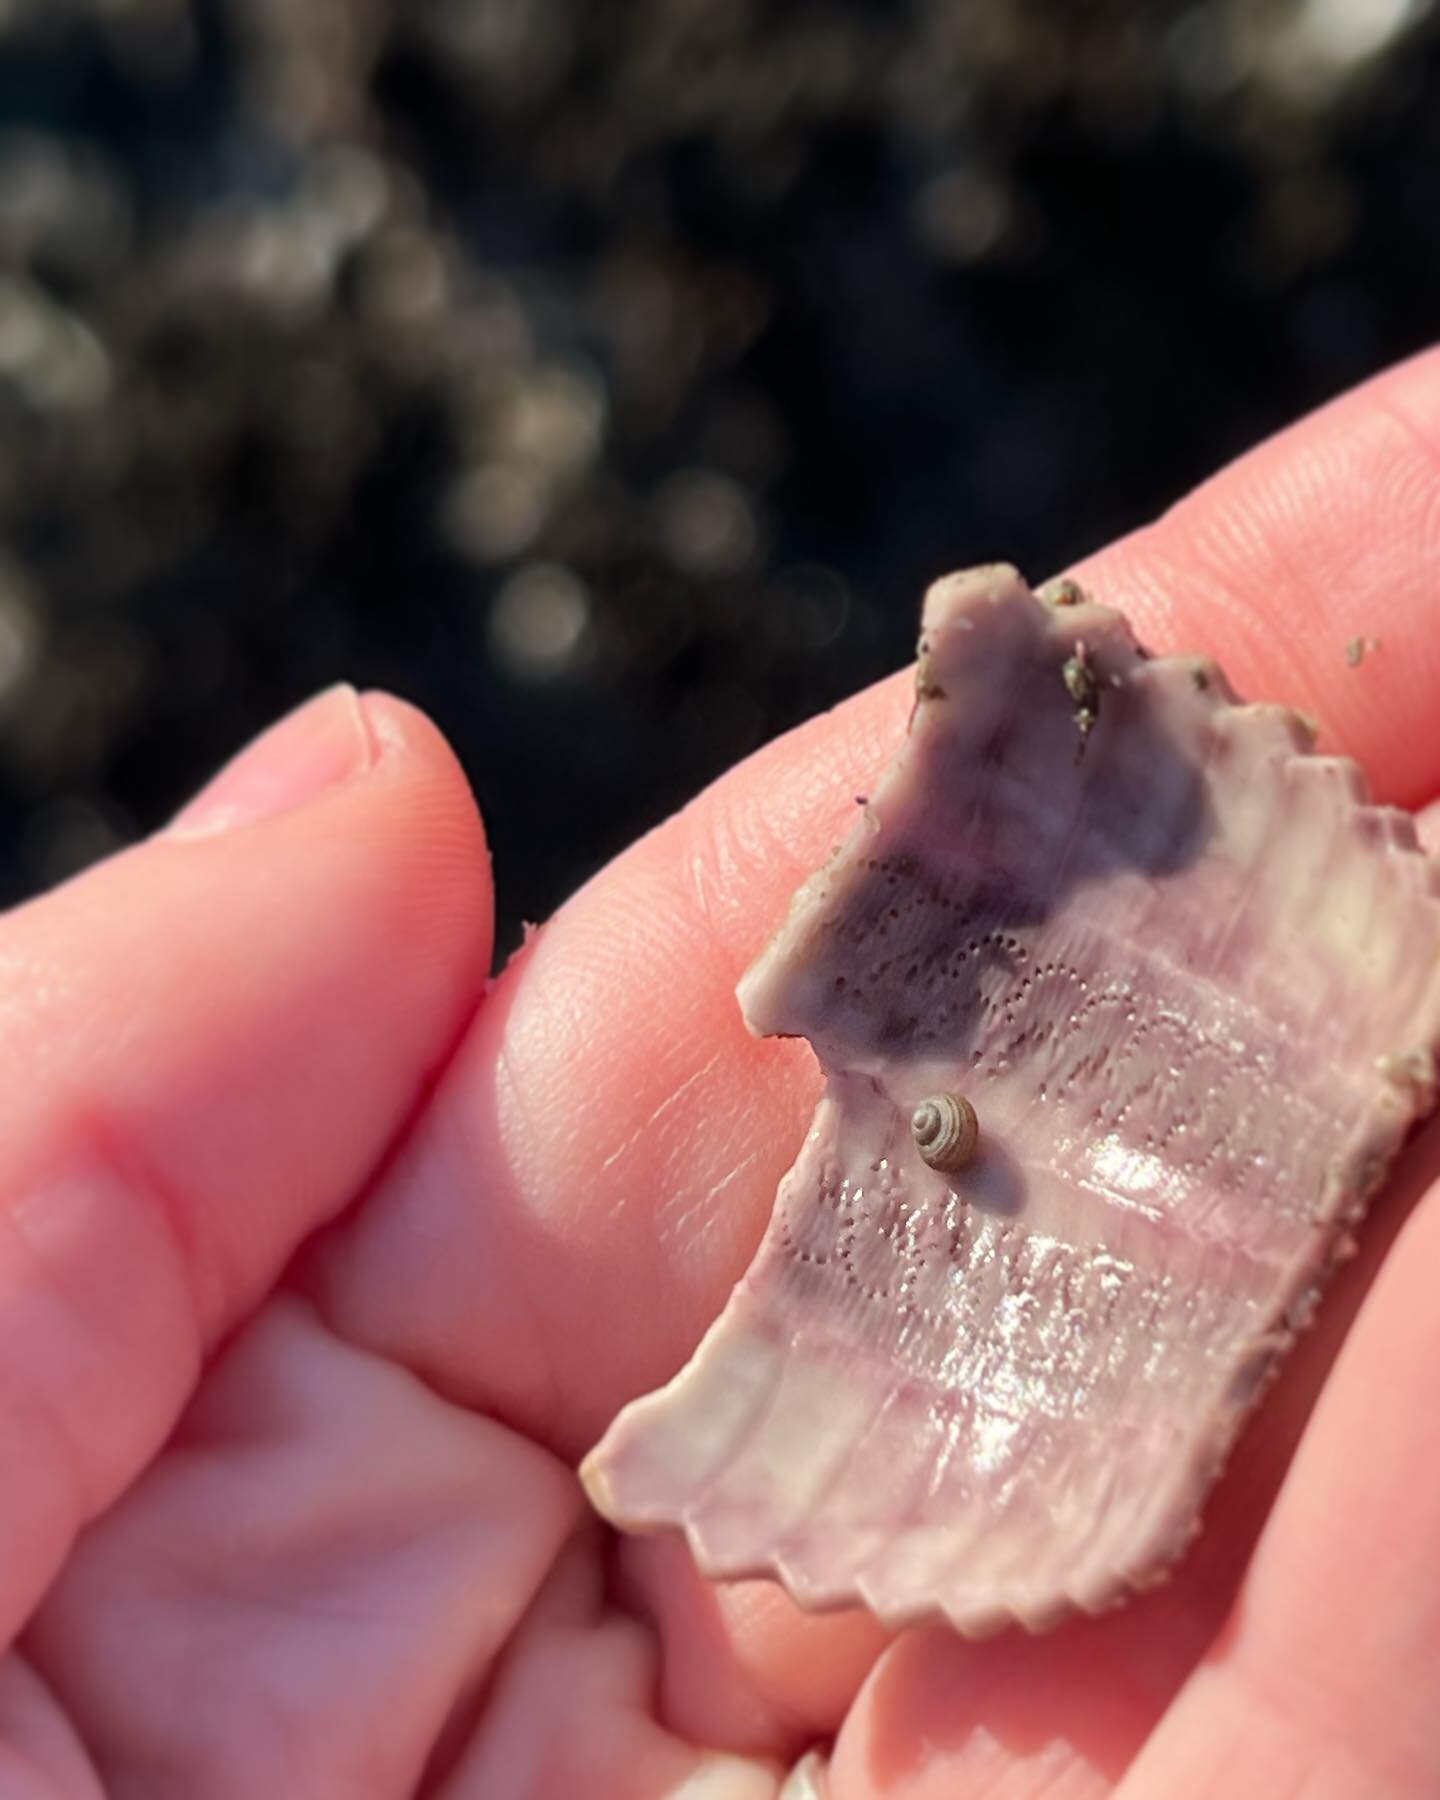 The tiniest find while tidepooling. 🥹

#lovefrompnw #tidepooling #tidepools #oregoncoast #oceanlife #beachfinds